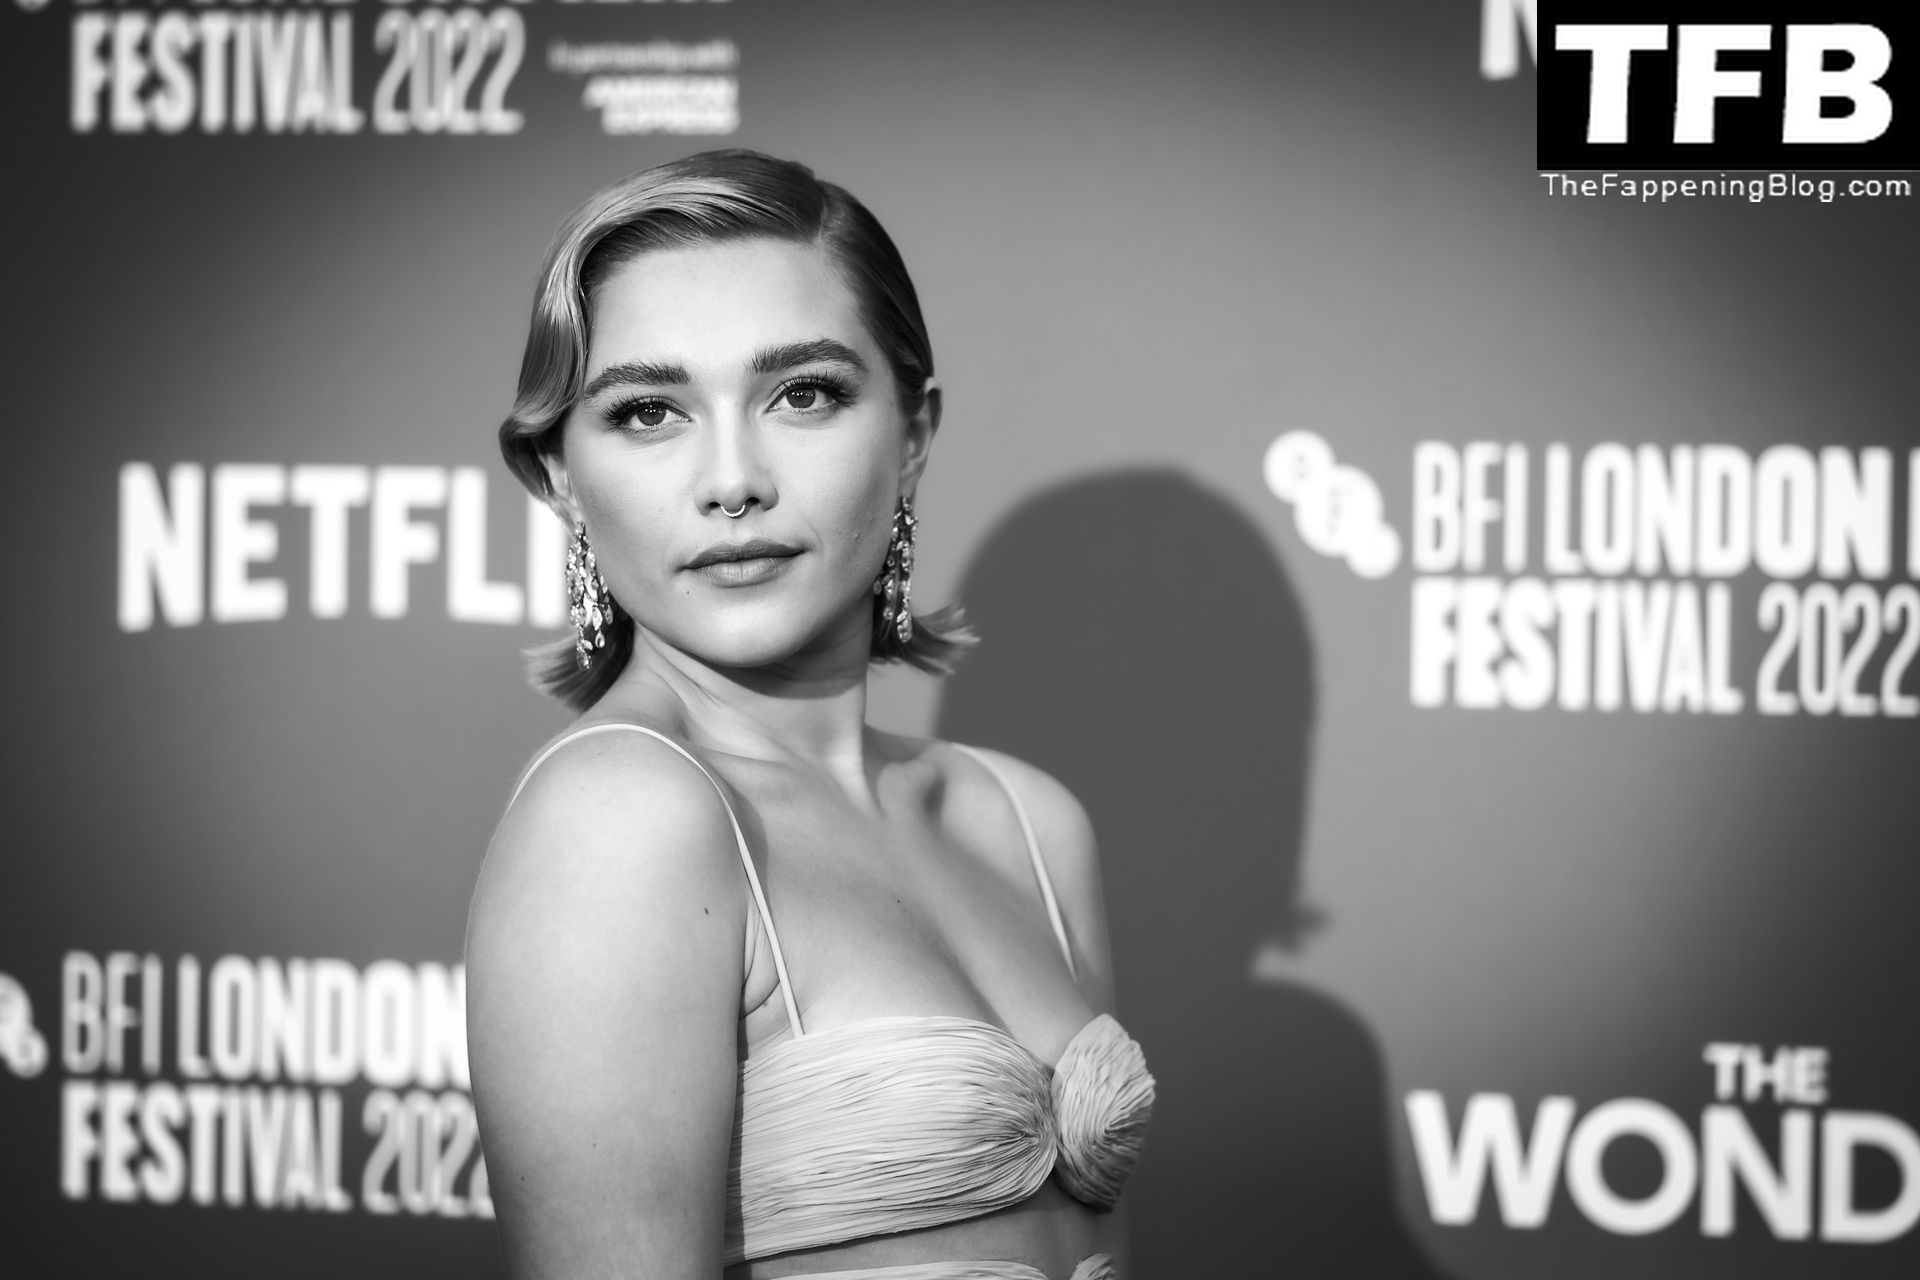 Florence-Pugh-Sexy-The-Fappening-Blog-138.jpg